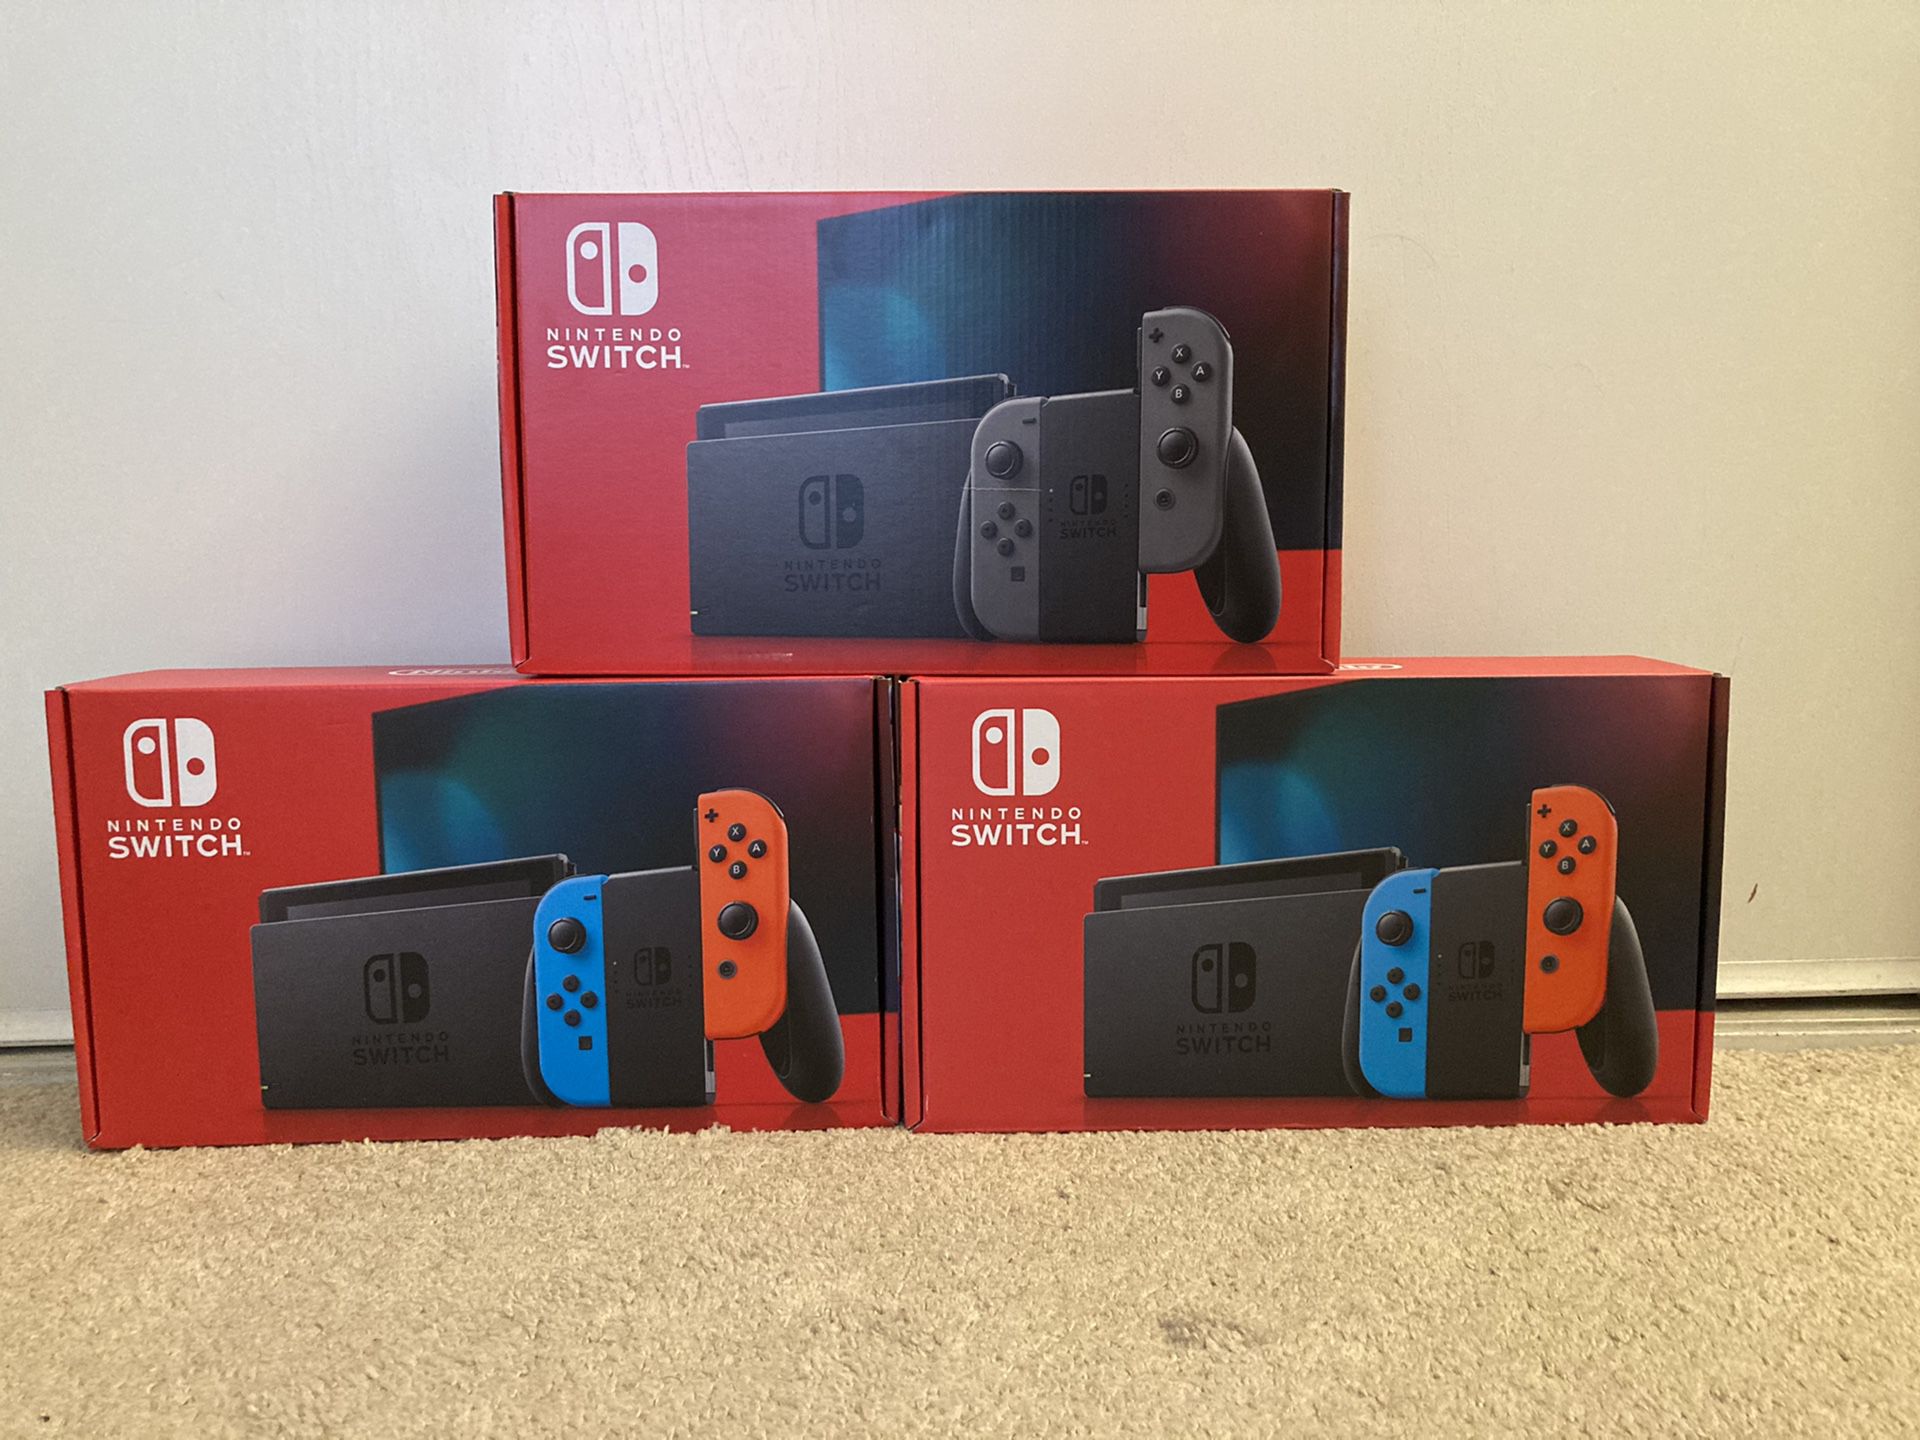 Nintendo Switch v2 32GB Console w/ Neon Blue/Red Joy-Cons IN-HAND!